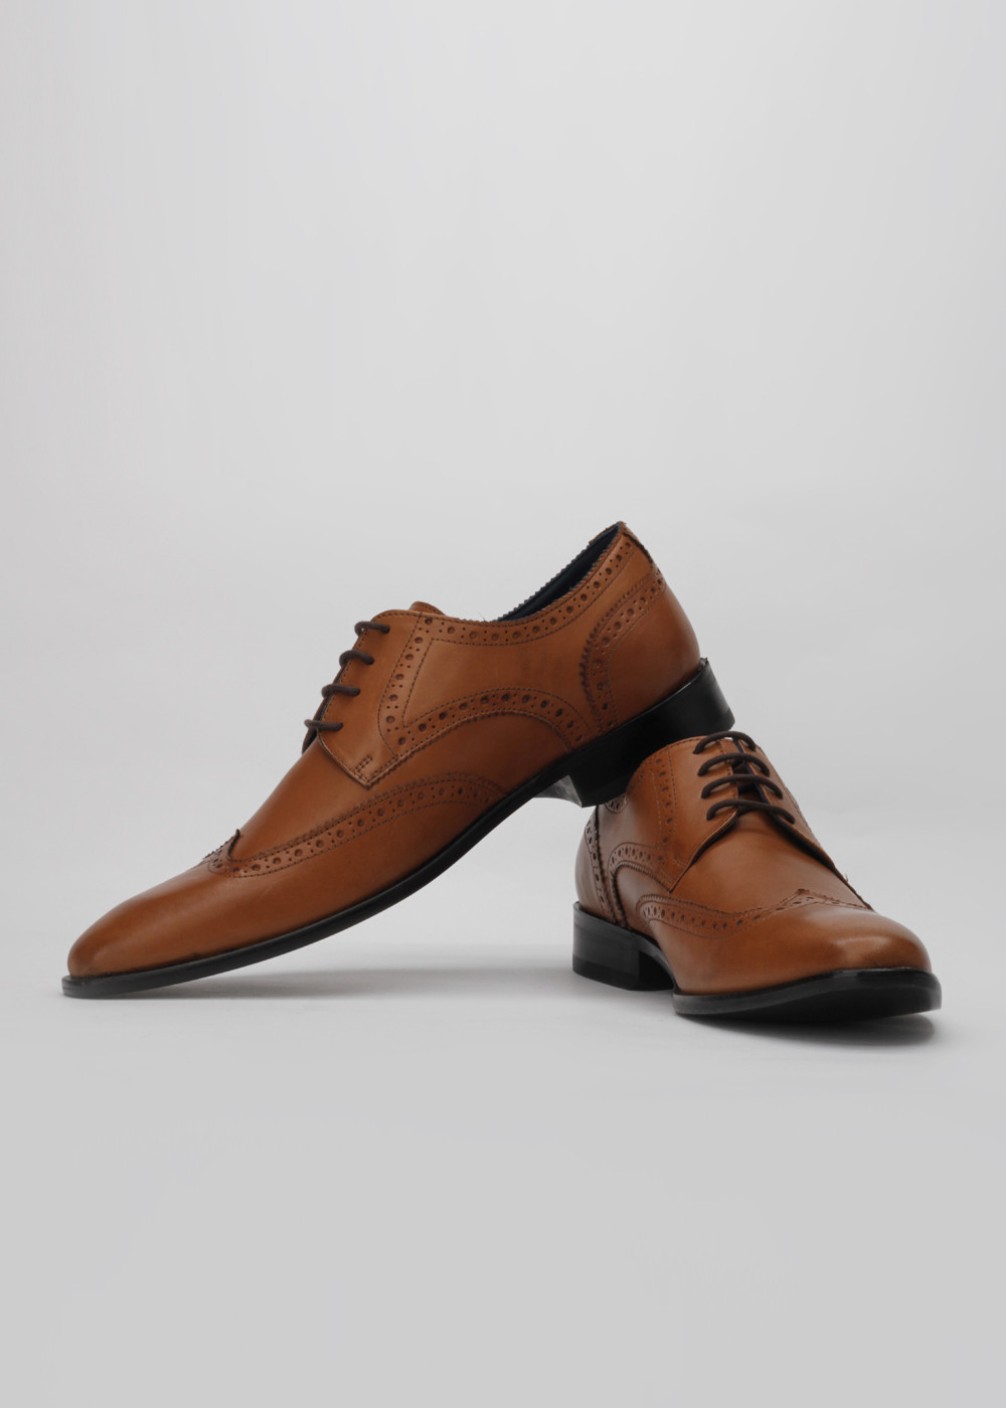 Louis Philippe Genuine Leather Lace Up Shoes For Men - Buy Tan Color Louis Philippe Genuine ...